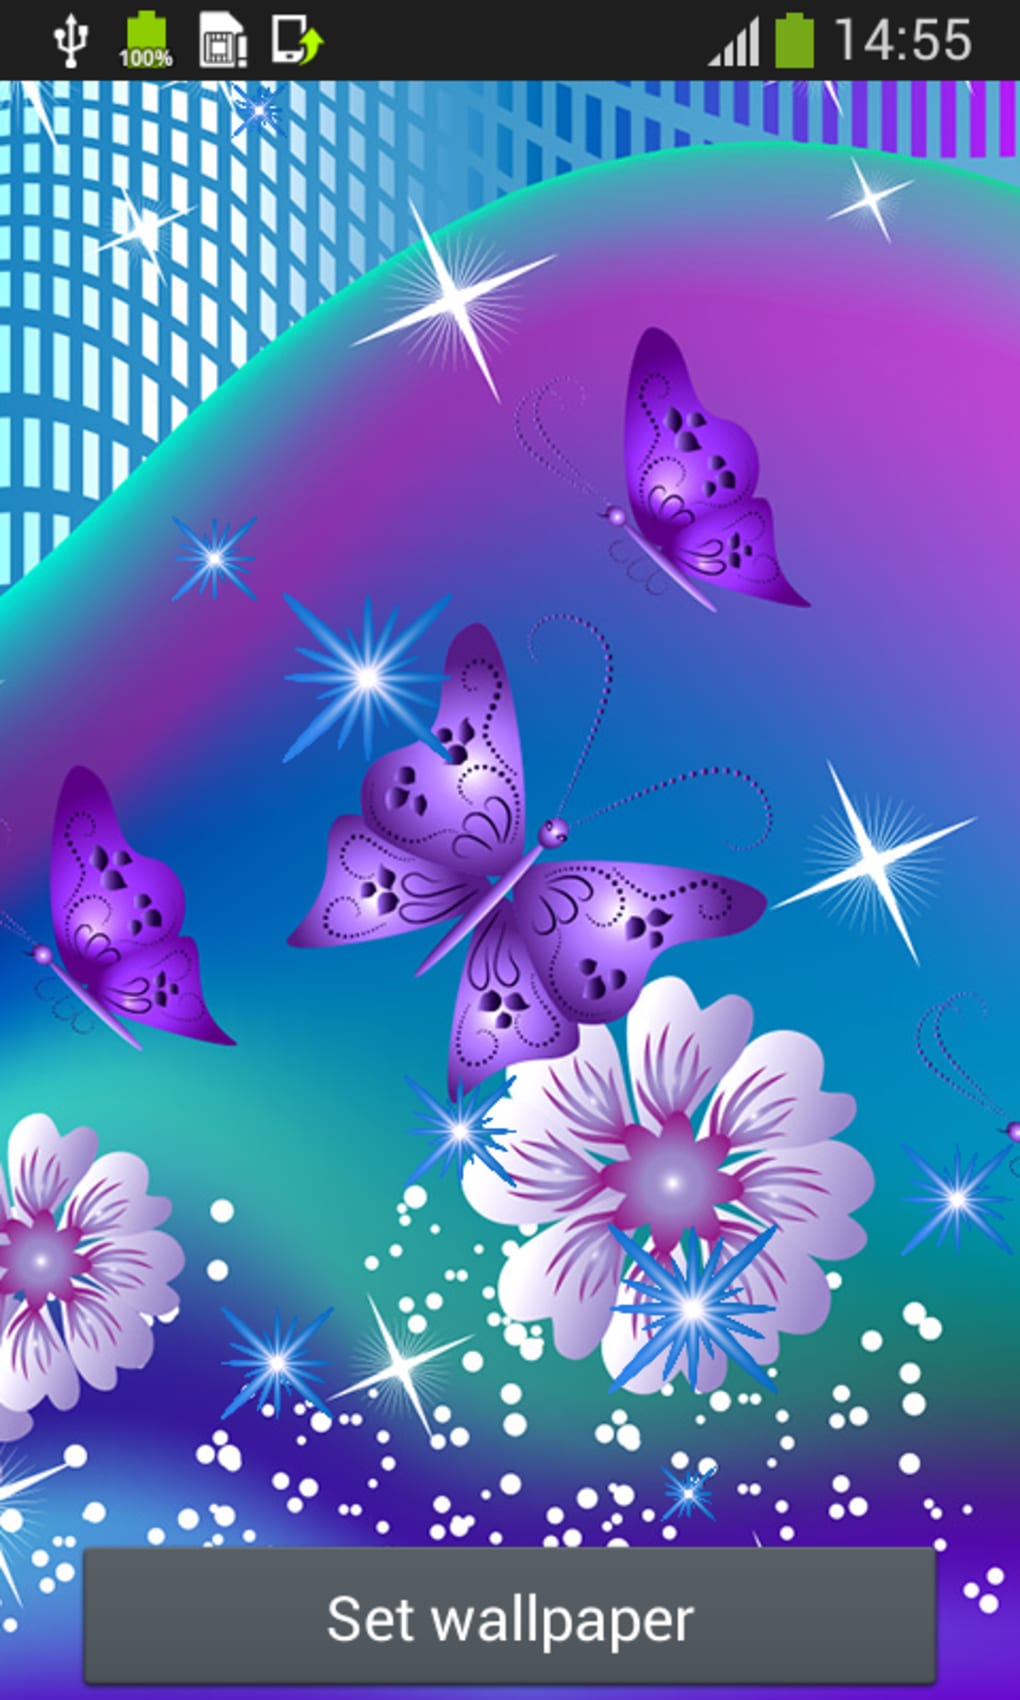 Butterfly Live Wallpaper For Android